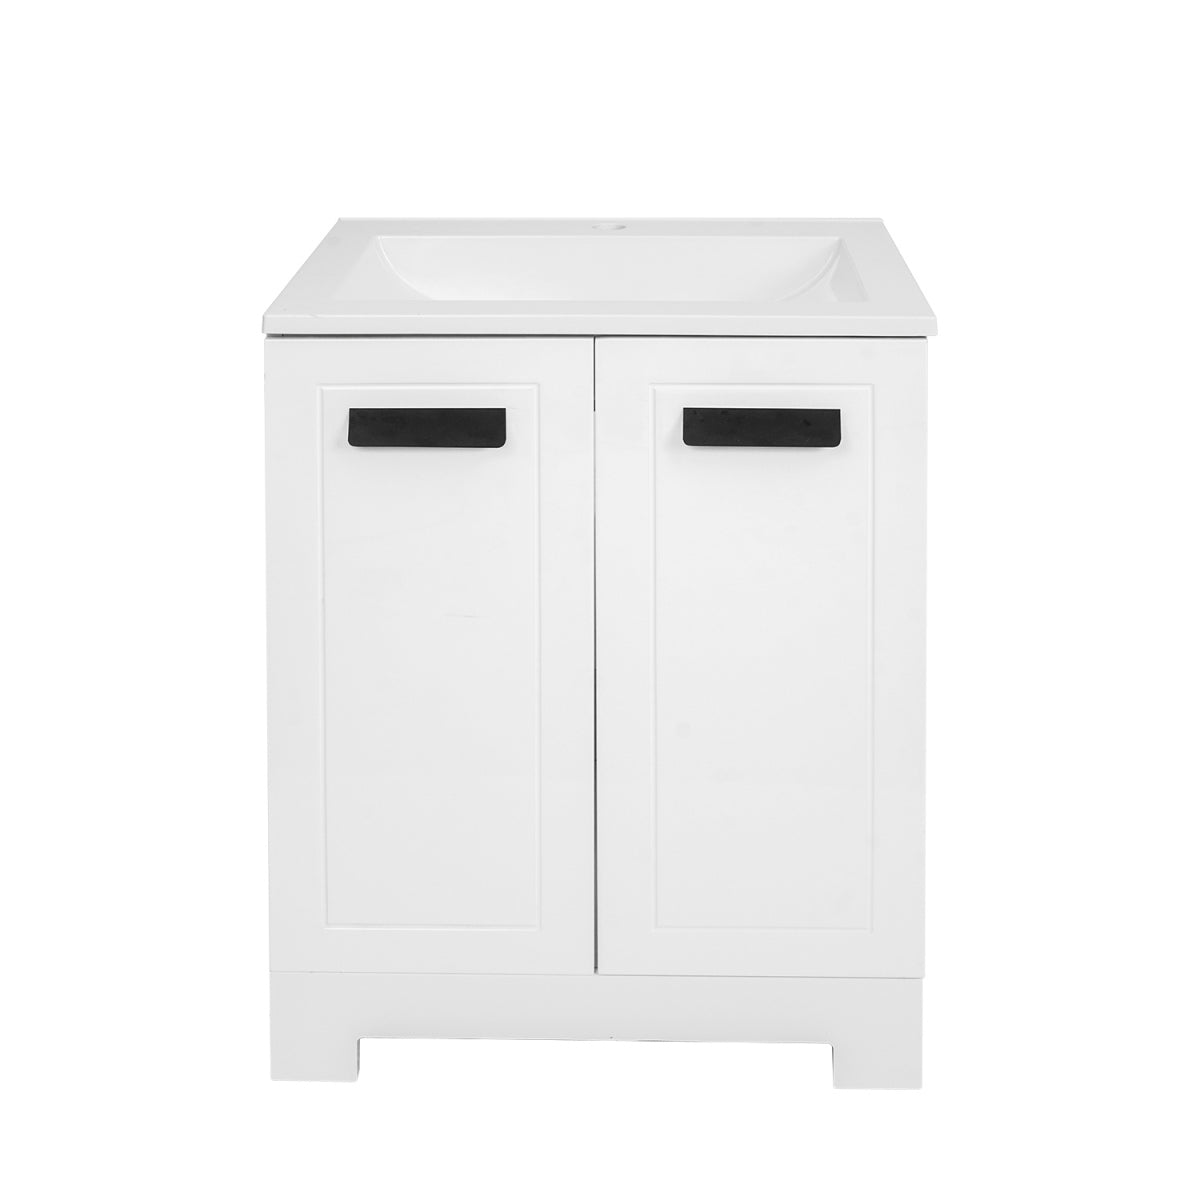 Elecwish Bathroom Vanity, 24 inch Modern Stand Pedestal Wooden Bathroom Cabinet with Undermount Sink Combo without faucet